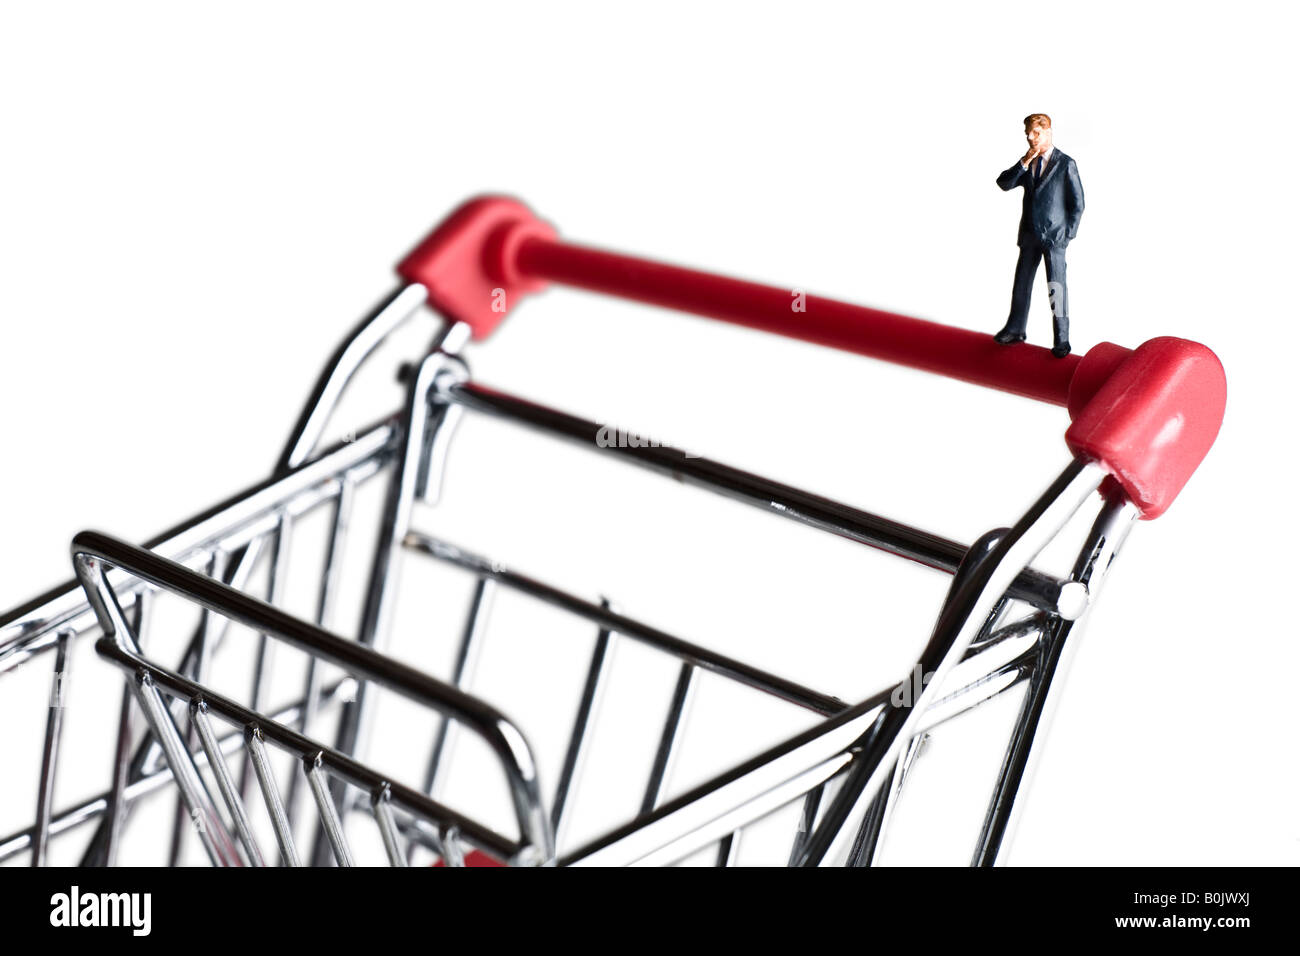 Businessman figurines standing on a shopping cart Stock Photo